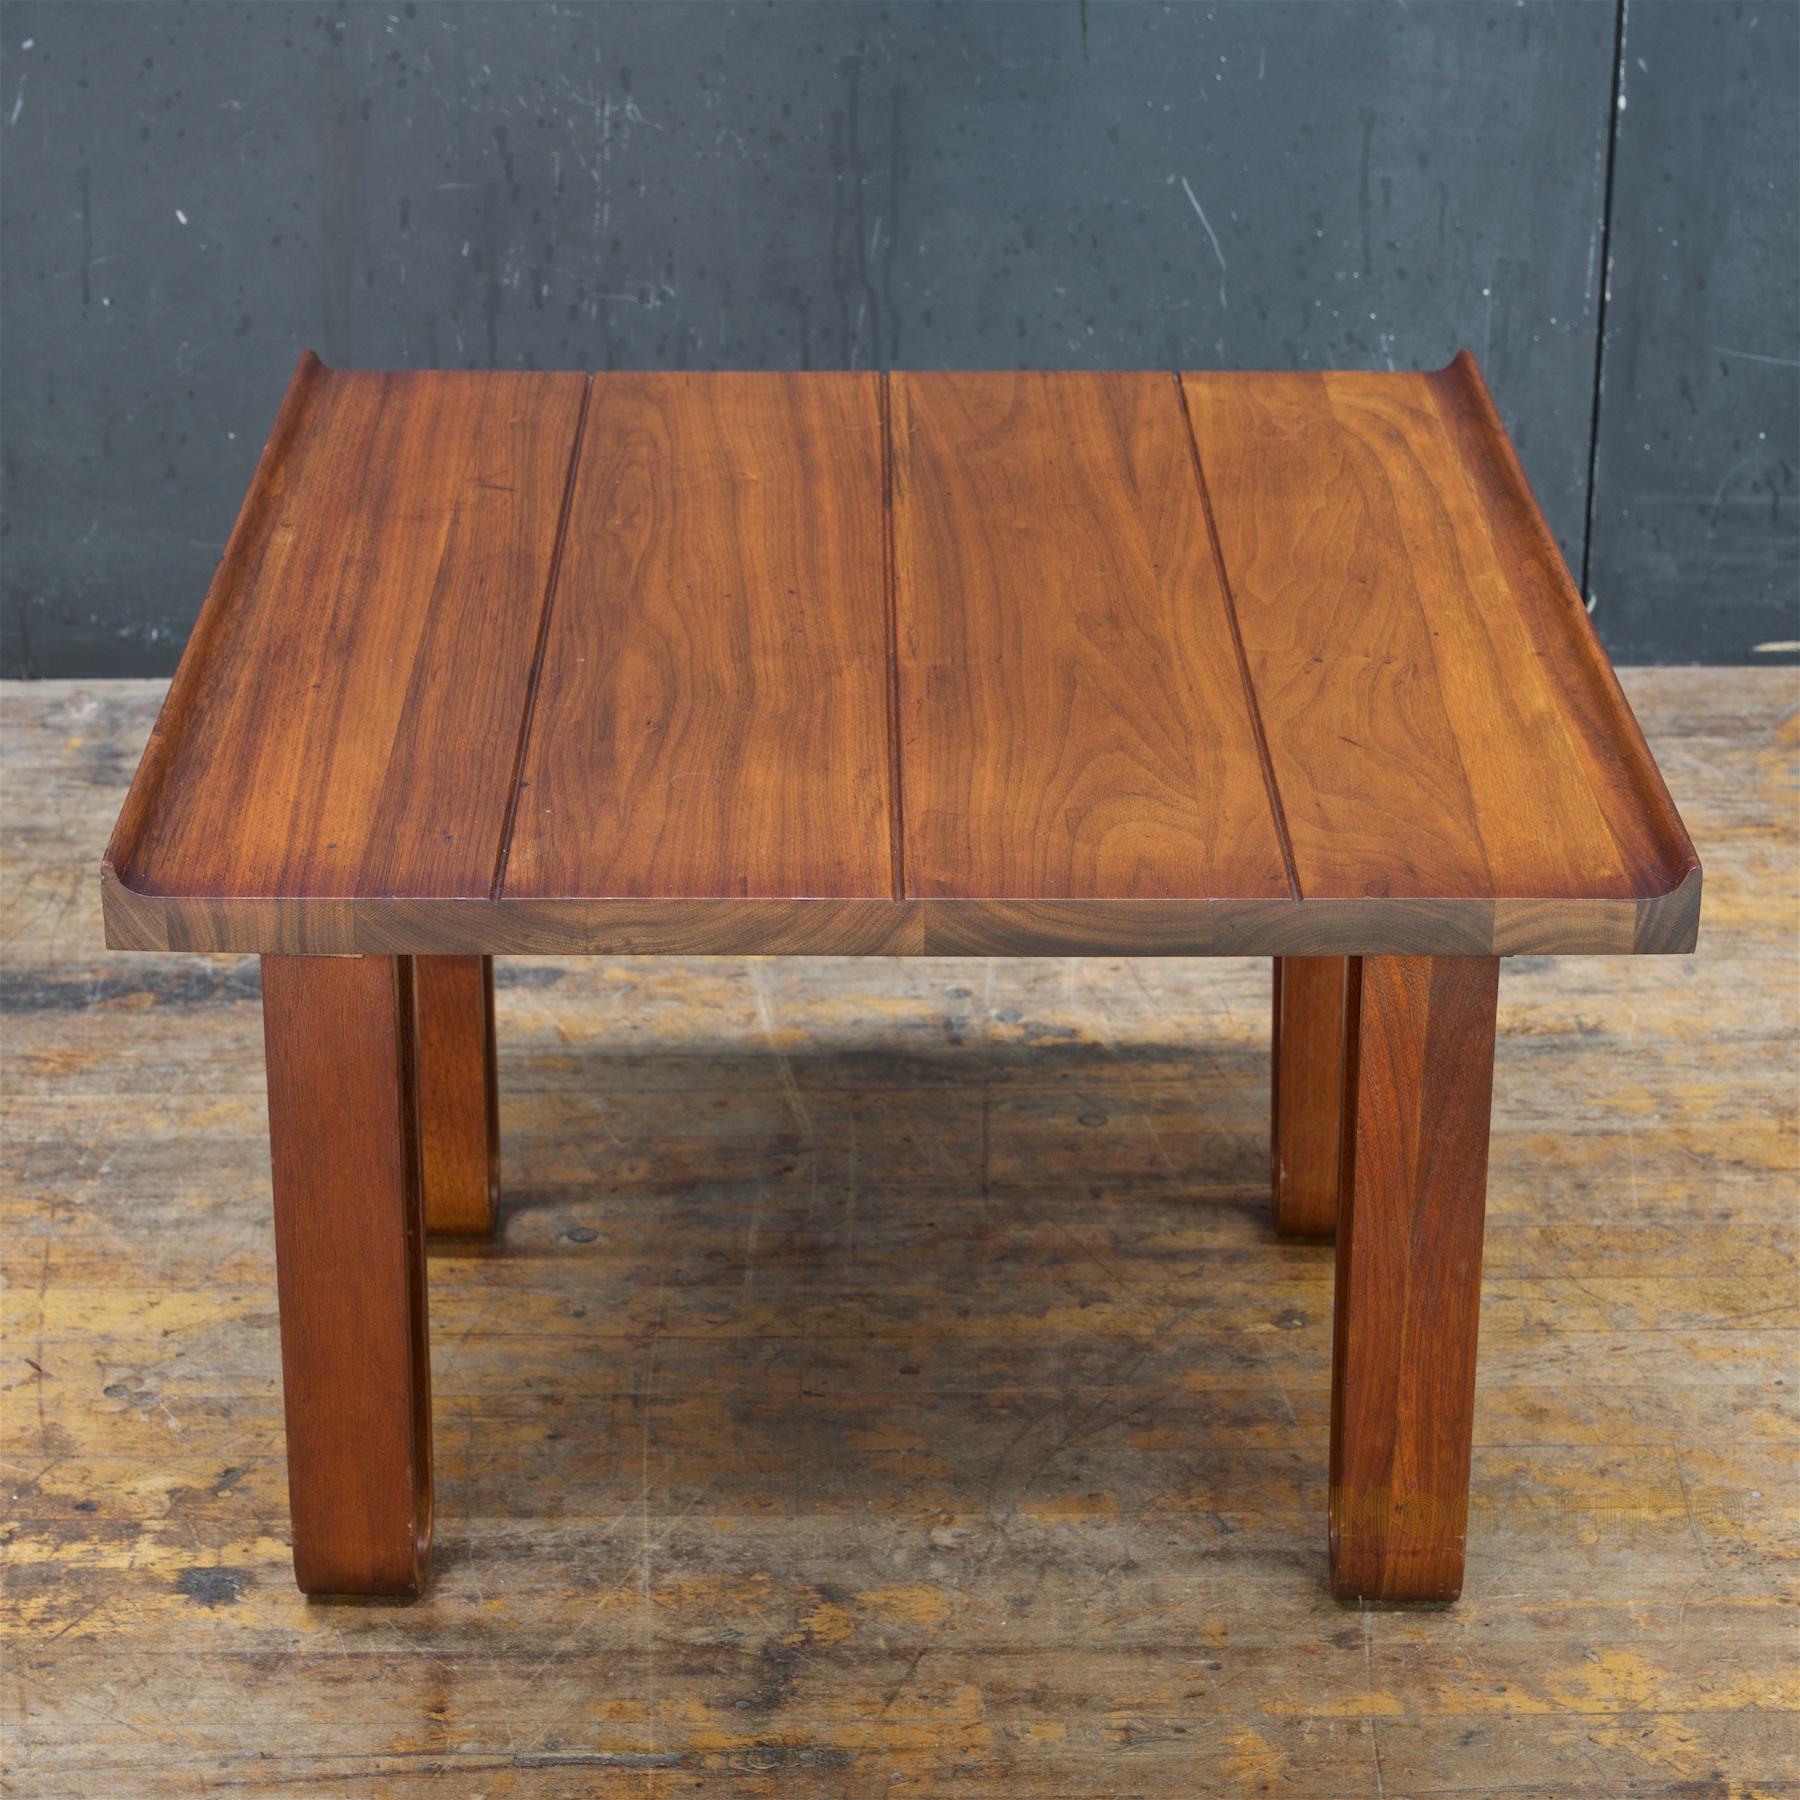 Warm staved solid walnut table surface, and very interesting proportions. No makers marks.